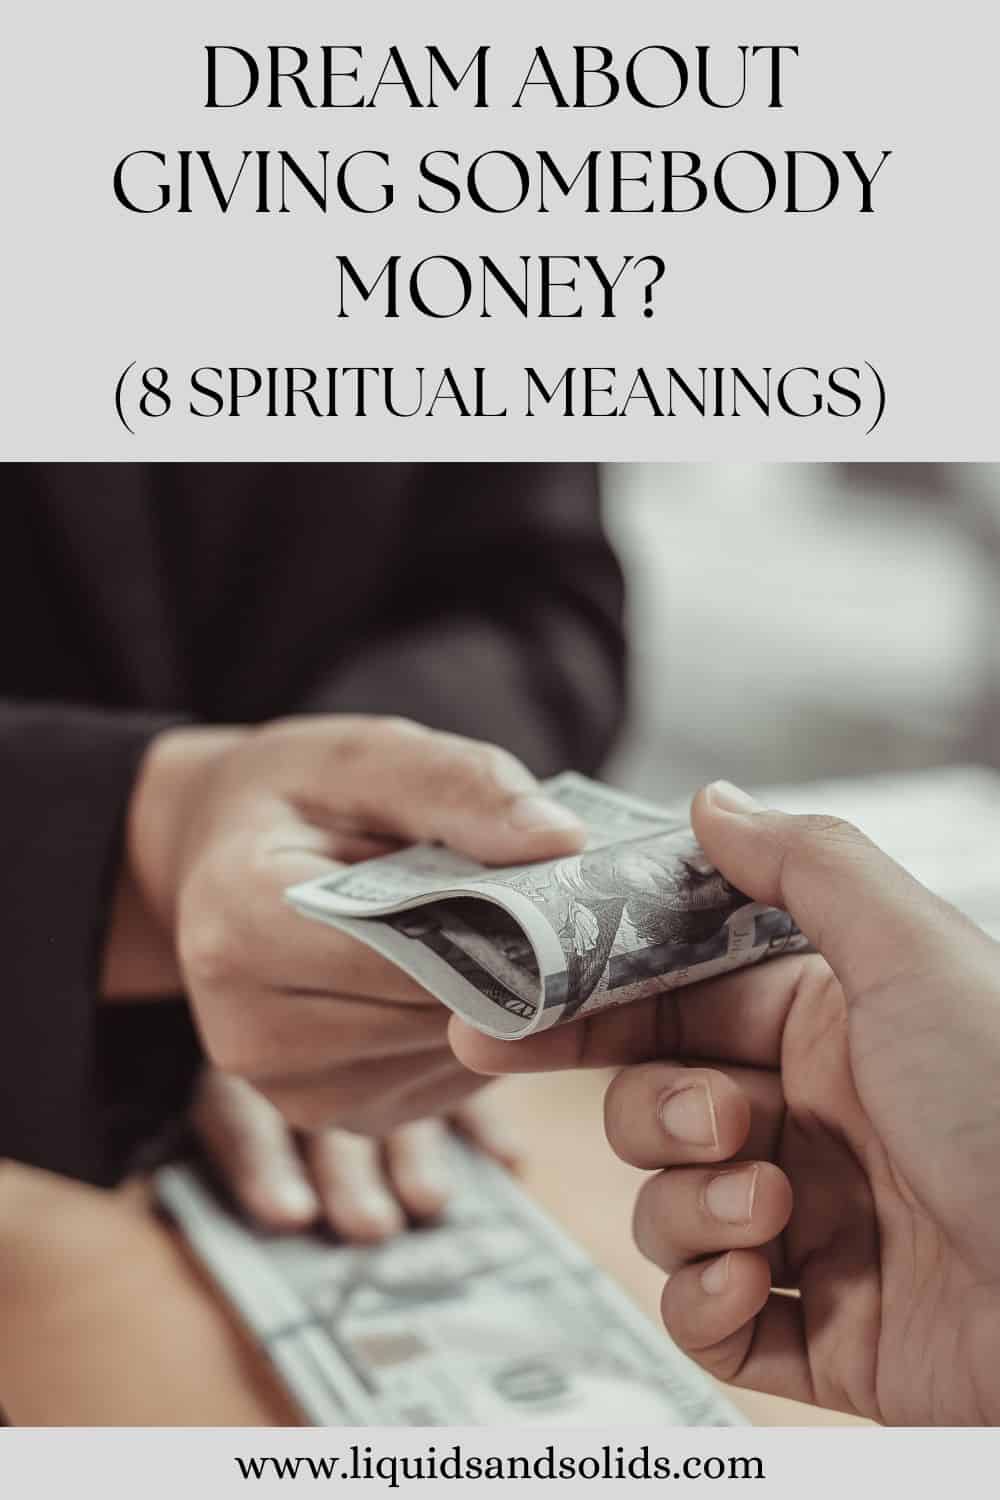 Dream About Giving Somebody Money? (8 Spiritual Meanings)